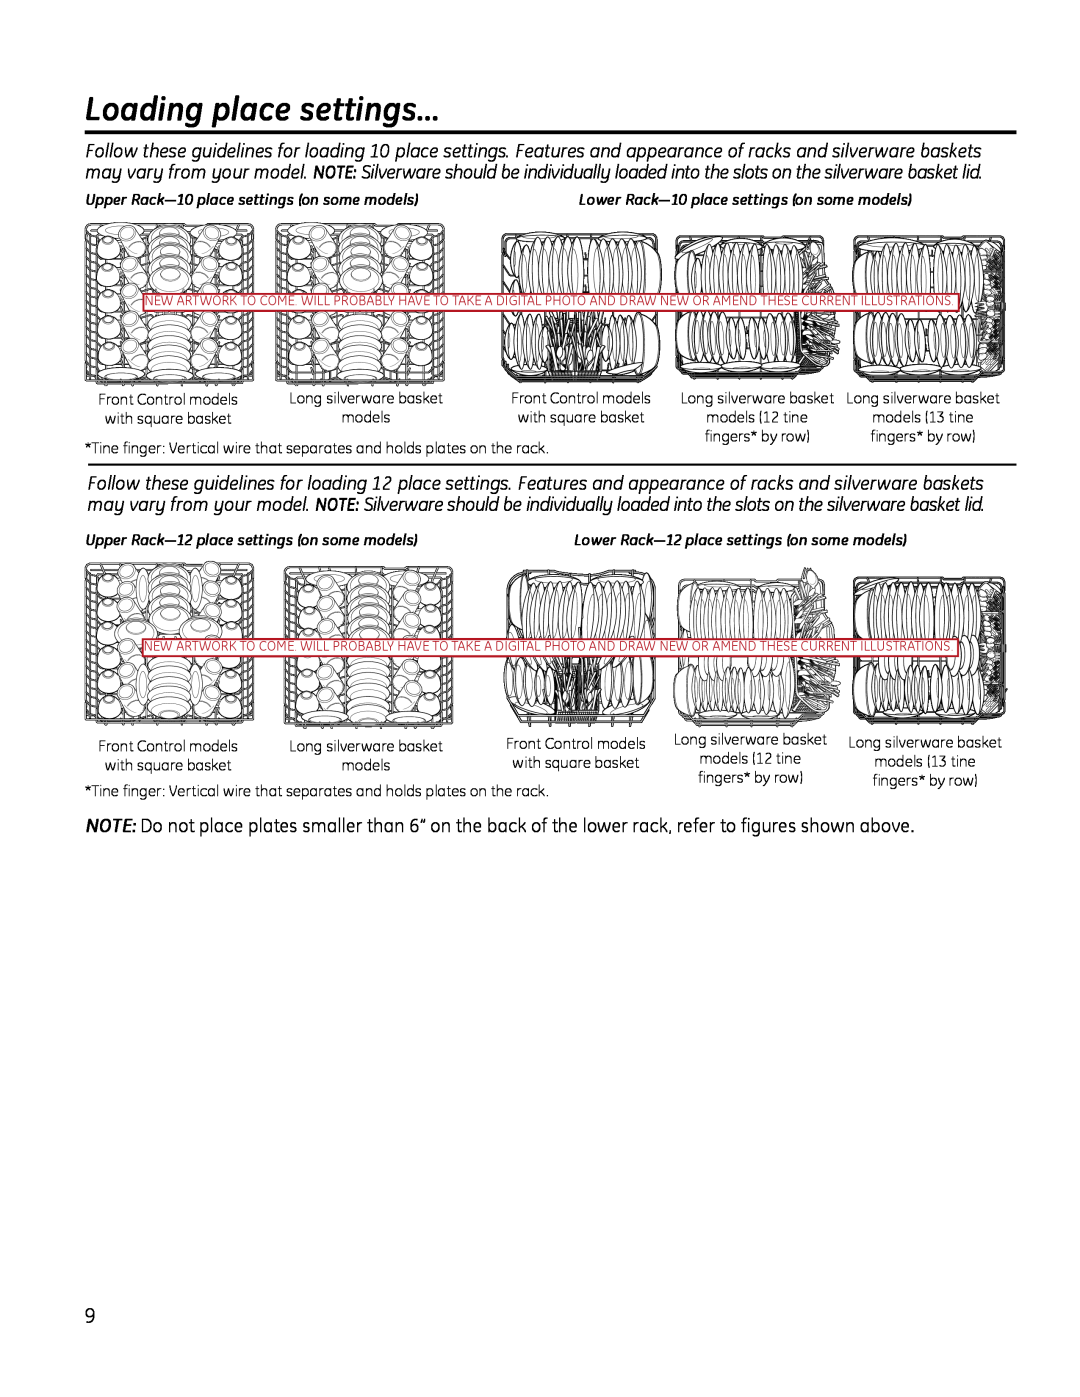 GE gdt510-540 owner manual Loading place settings…, Upper Rack-10 place settings on some models 